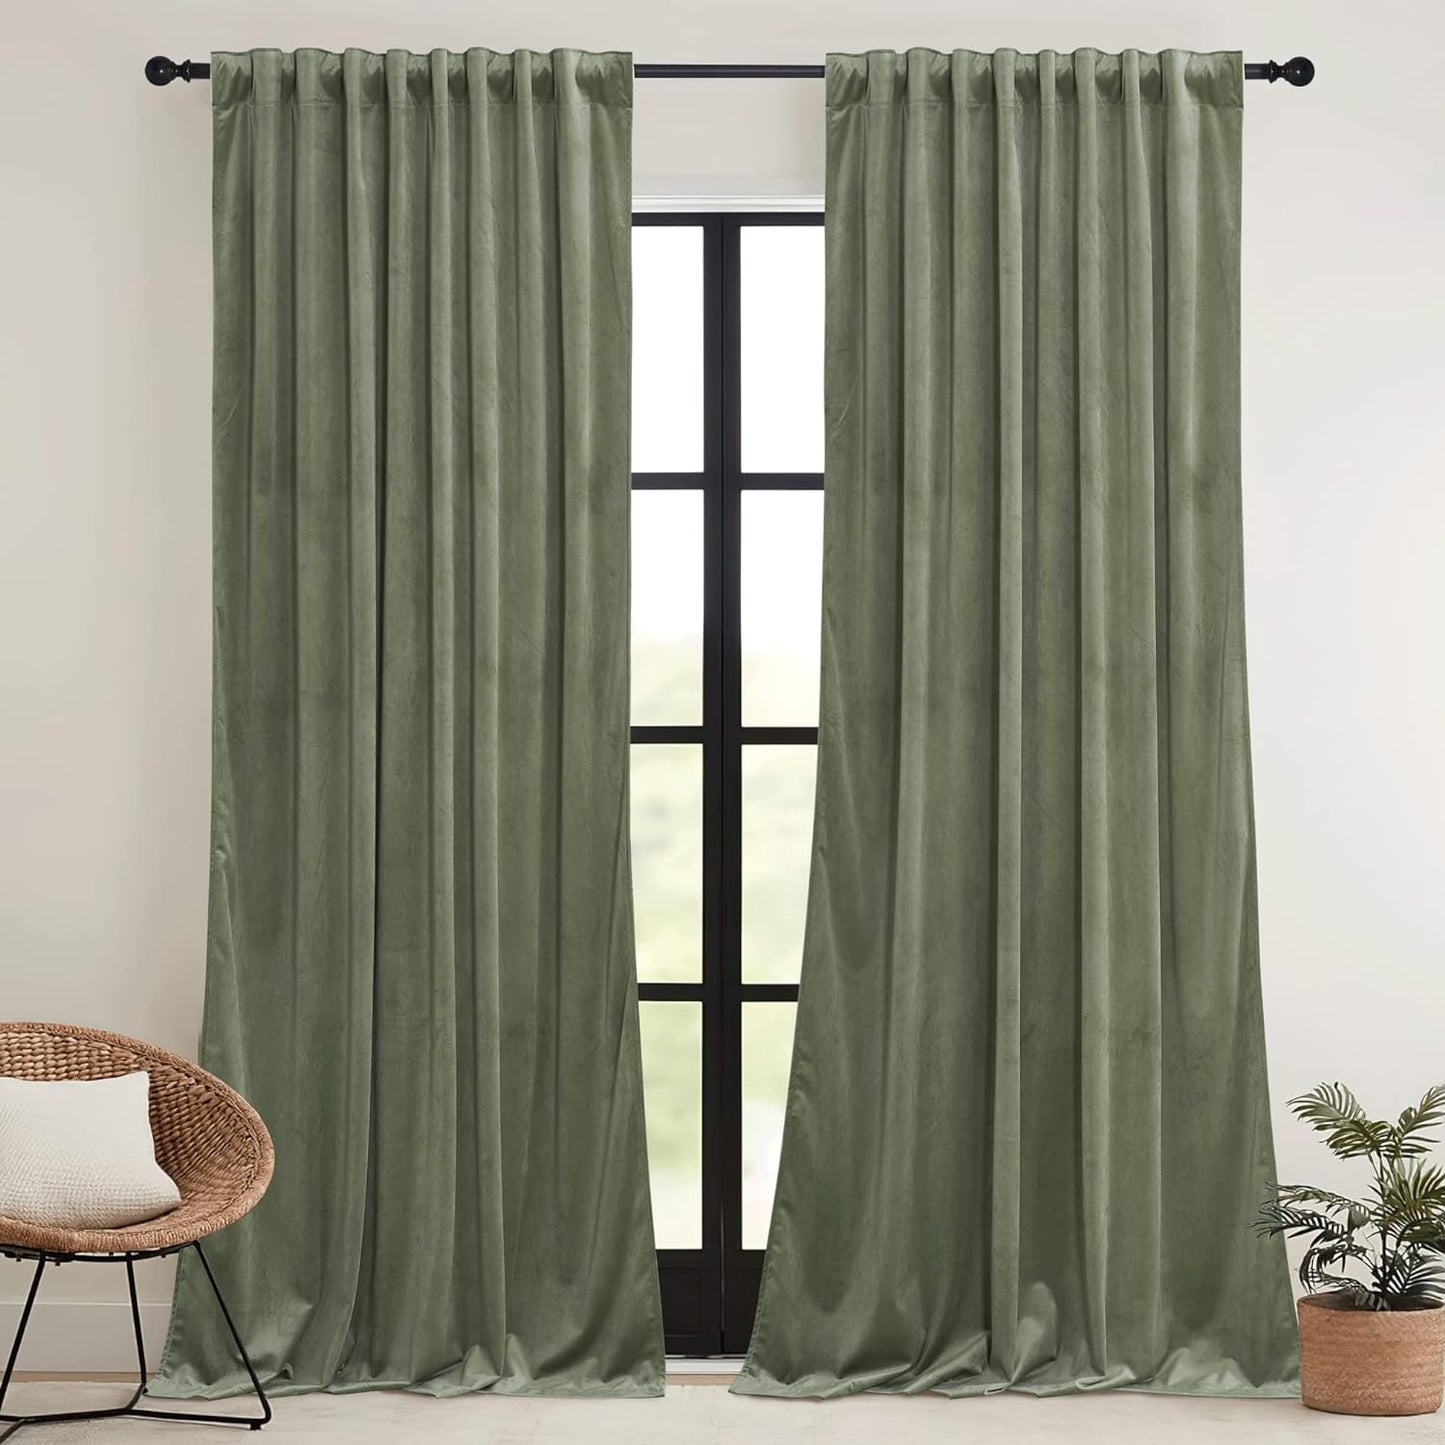 RYB HOME Sage Green Velvet Curtains 84 Inch, Room Darkening Super Soft Velvet Drapes for Living Room Thermal Insulated Pleat Tapes Window Treatment for Bedroom Playroom, W52 X L84 Inch, 2 Panels  RYB HOME   